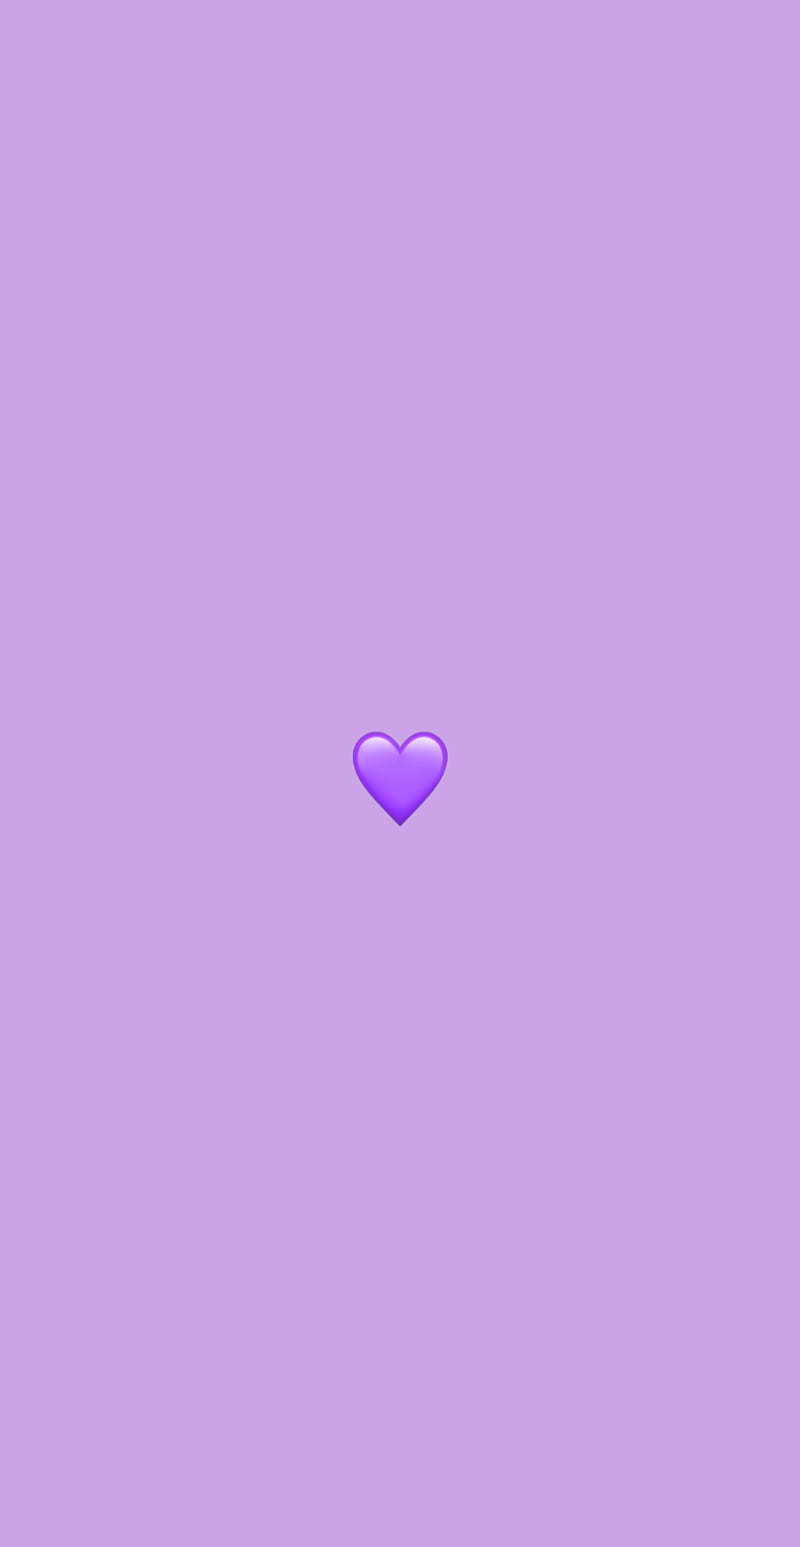 Emo Tumblr Live Wallpaper with Lavender Background - free download